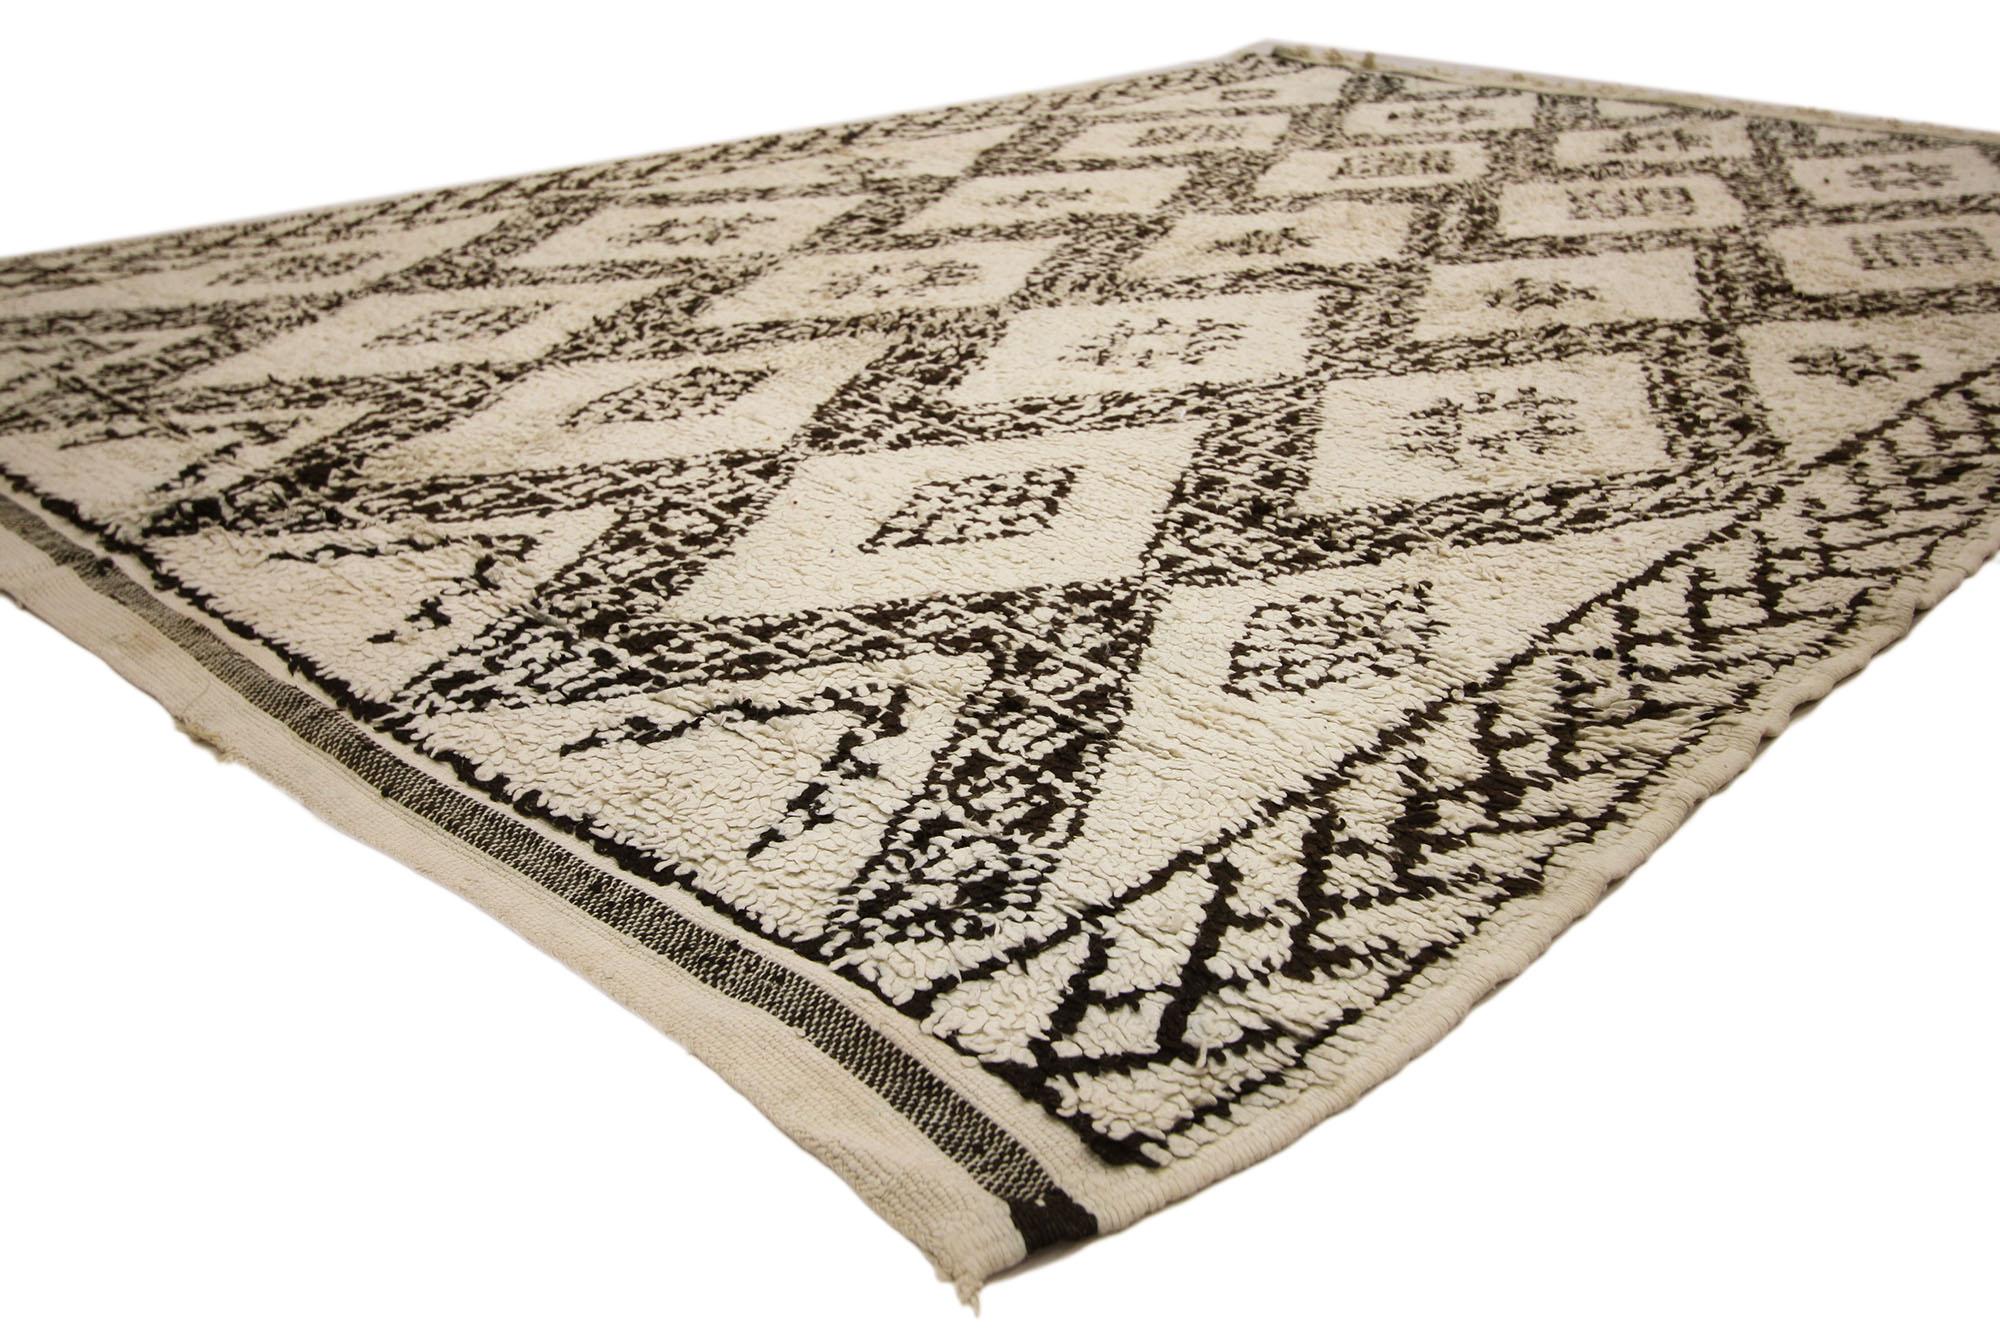 20745 Vintage Moroccan Beni Ourain Rug, 06'03 x 08'09. This hand-knotted wool vintage Beni Ourain Moroccan rug features a lozenge trellis pattern on a neutral background. Bold, thick lines composed of squares form a diamond lattice on a field of